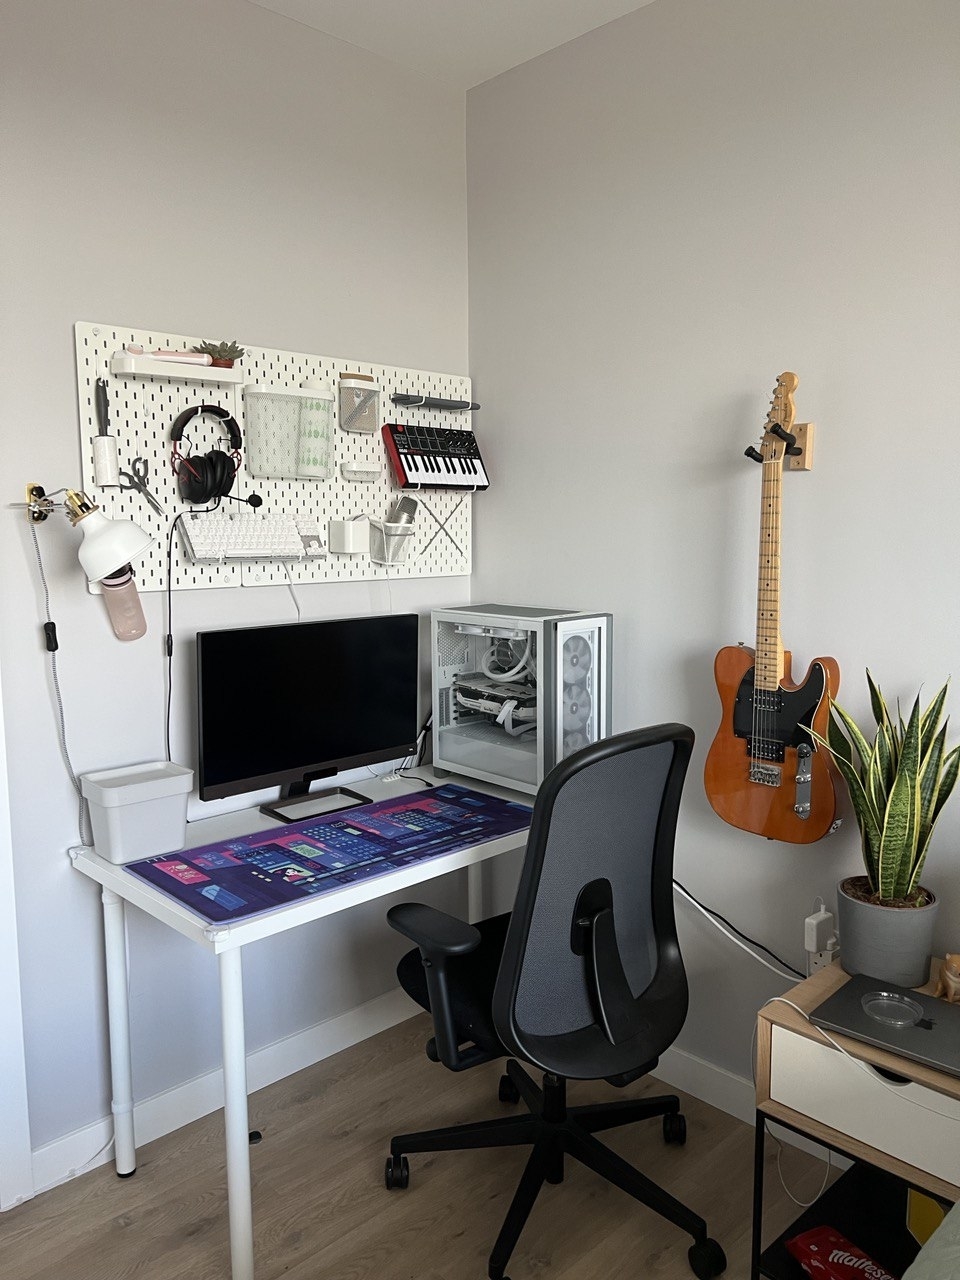 Pegboards above a desk holding music supplies and other objects